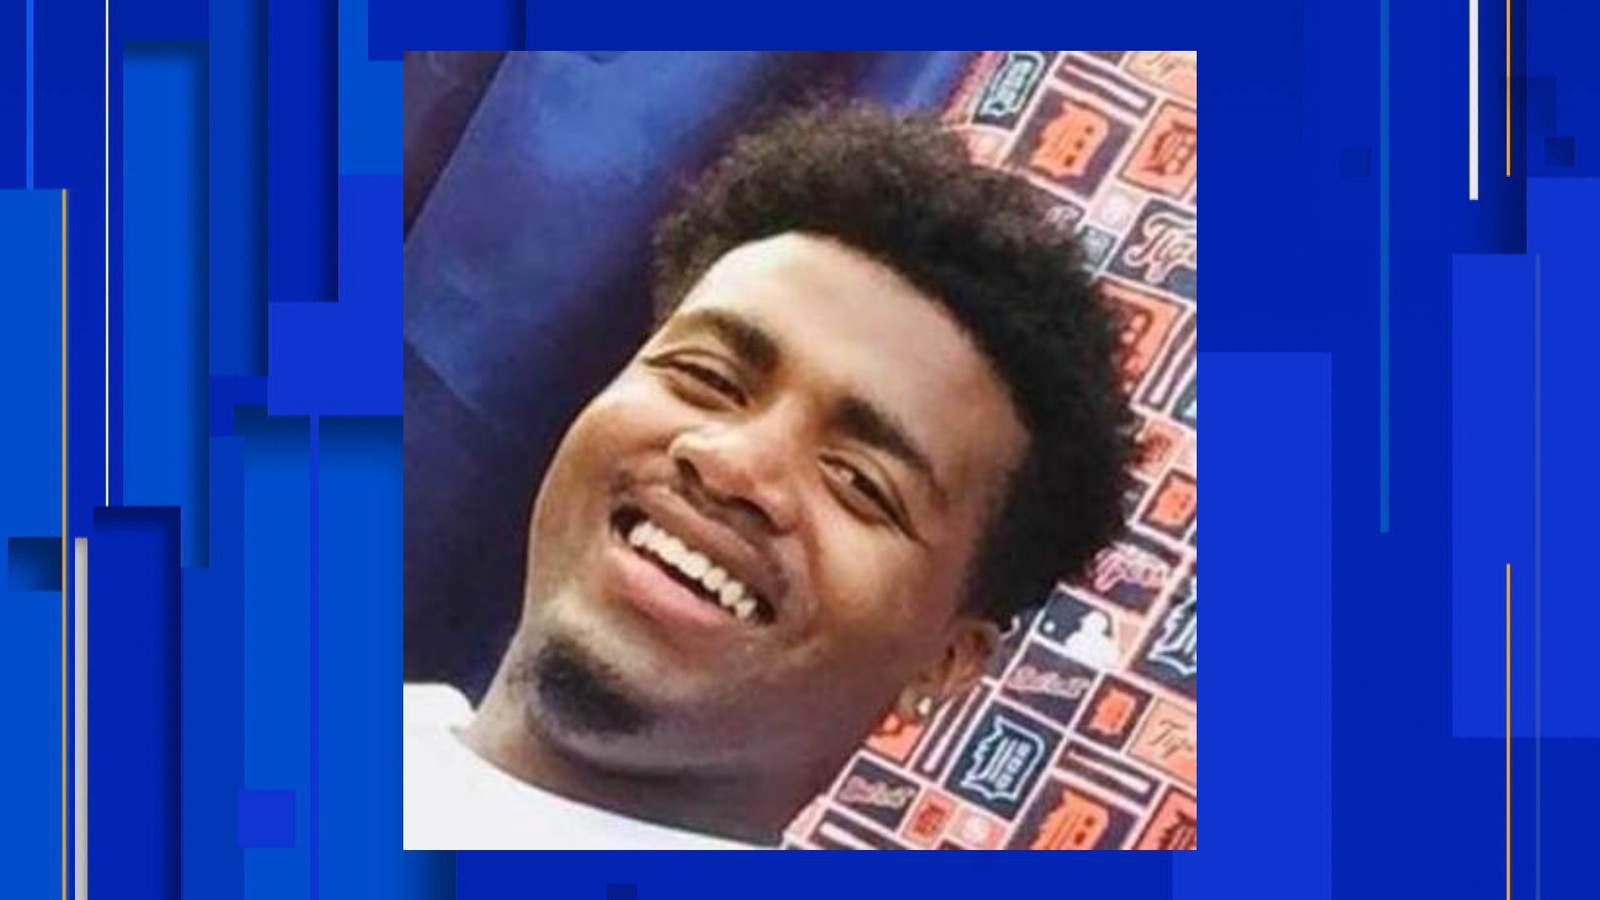 Family seeking justice for 21-year-old shot, killed nearly two years ago in Detroit